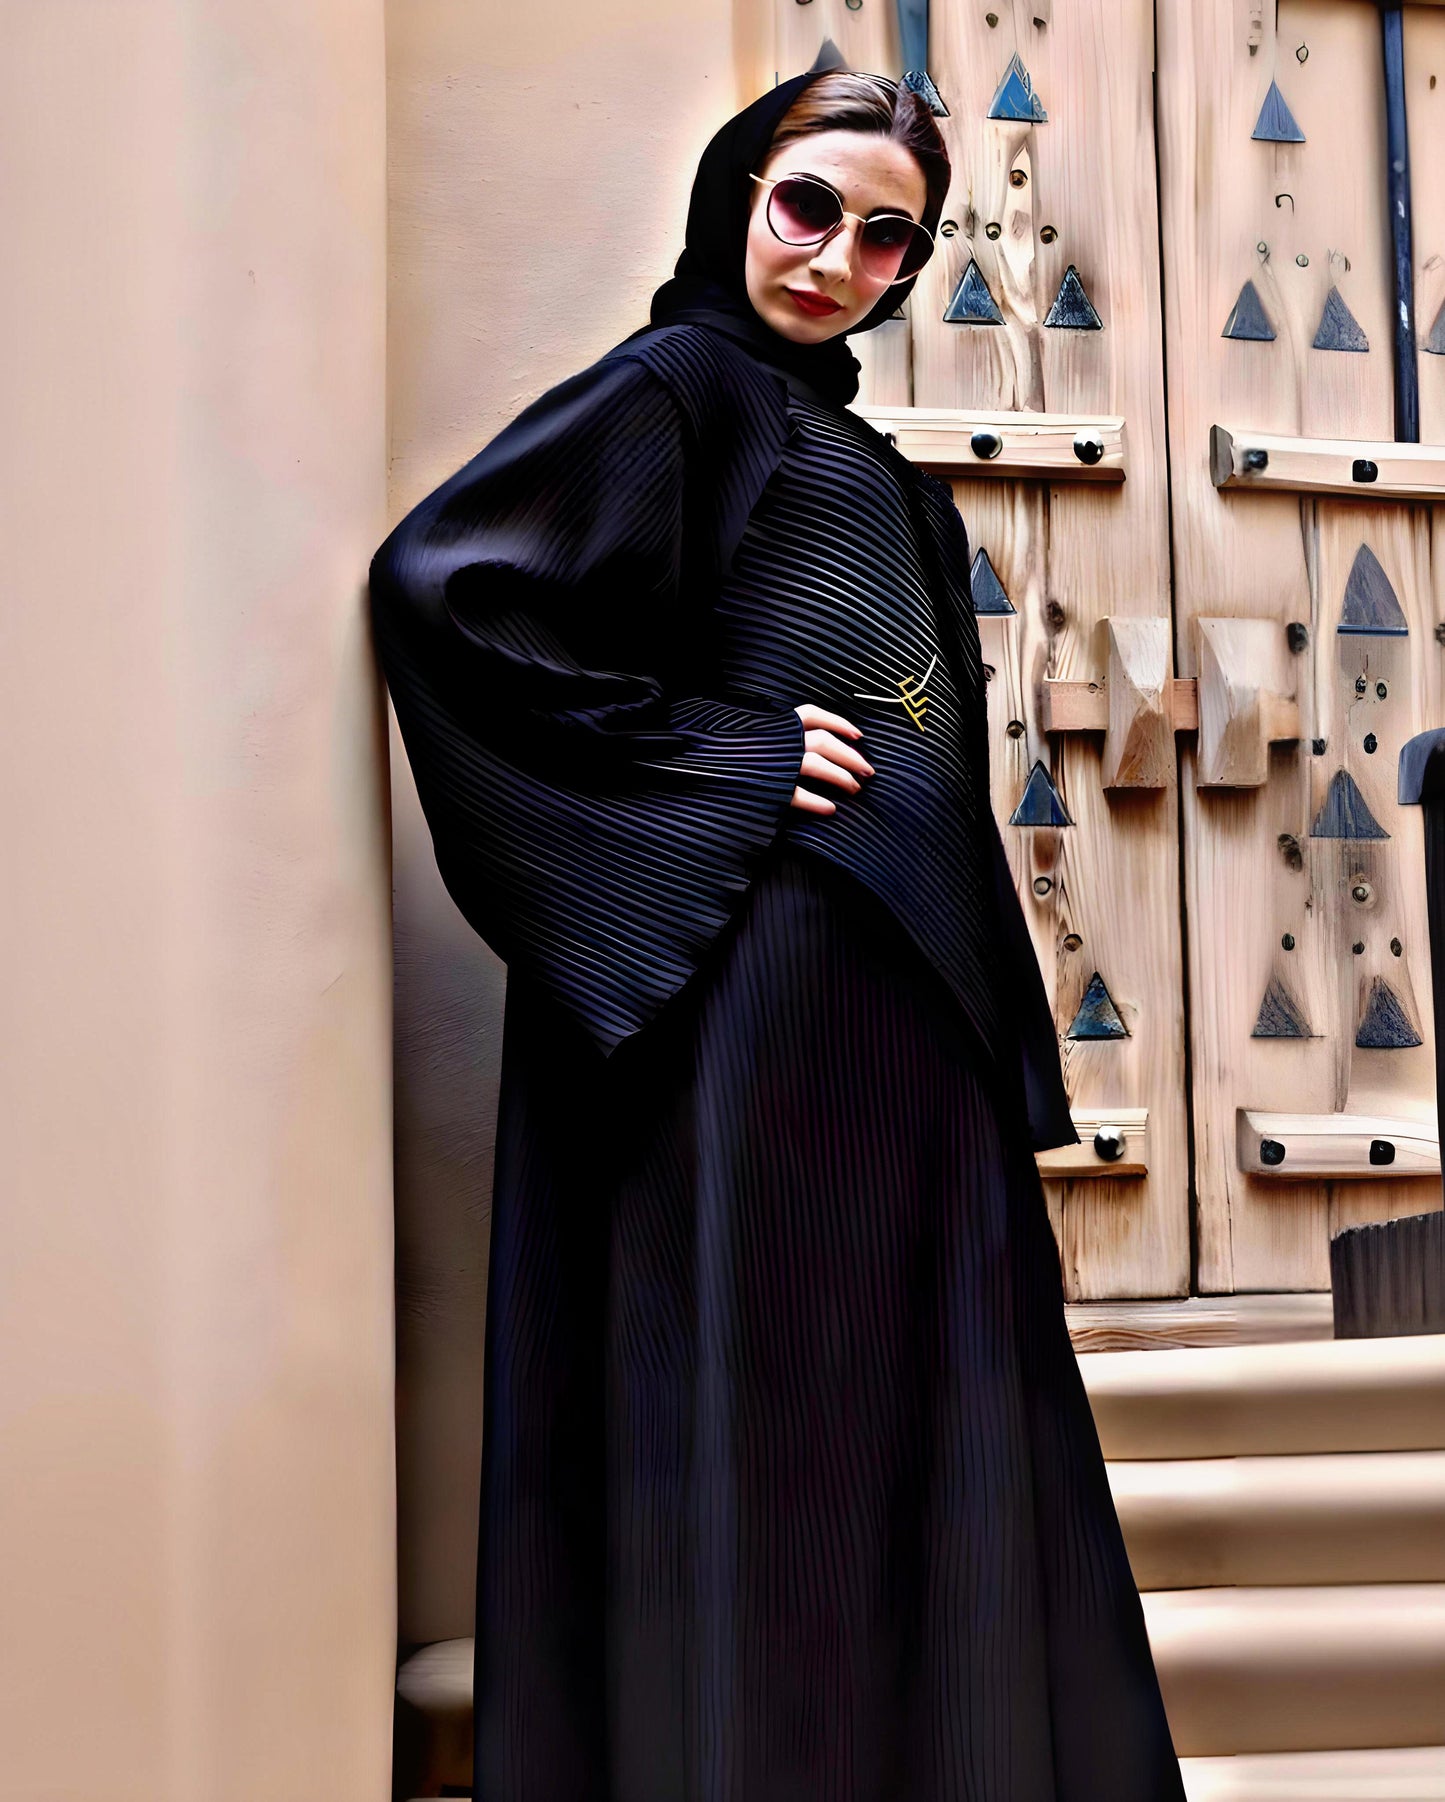 Plane patterned black abaya stylish look with premium quality fabric for women and Girls to look elegant